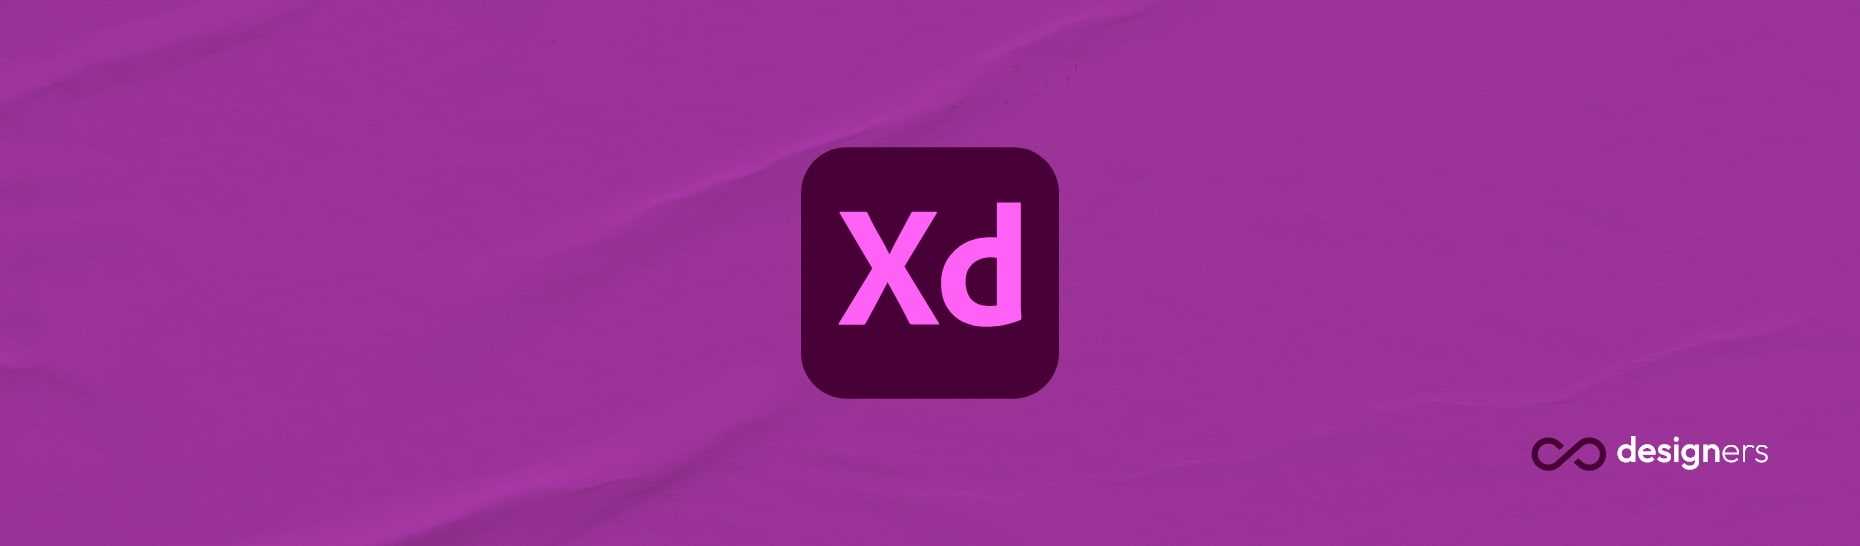 Can You Import Code in Adobe XD?